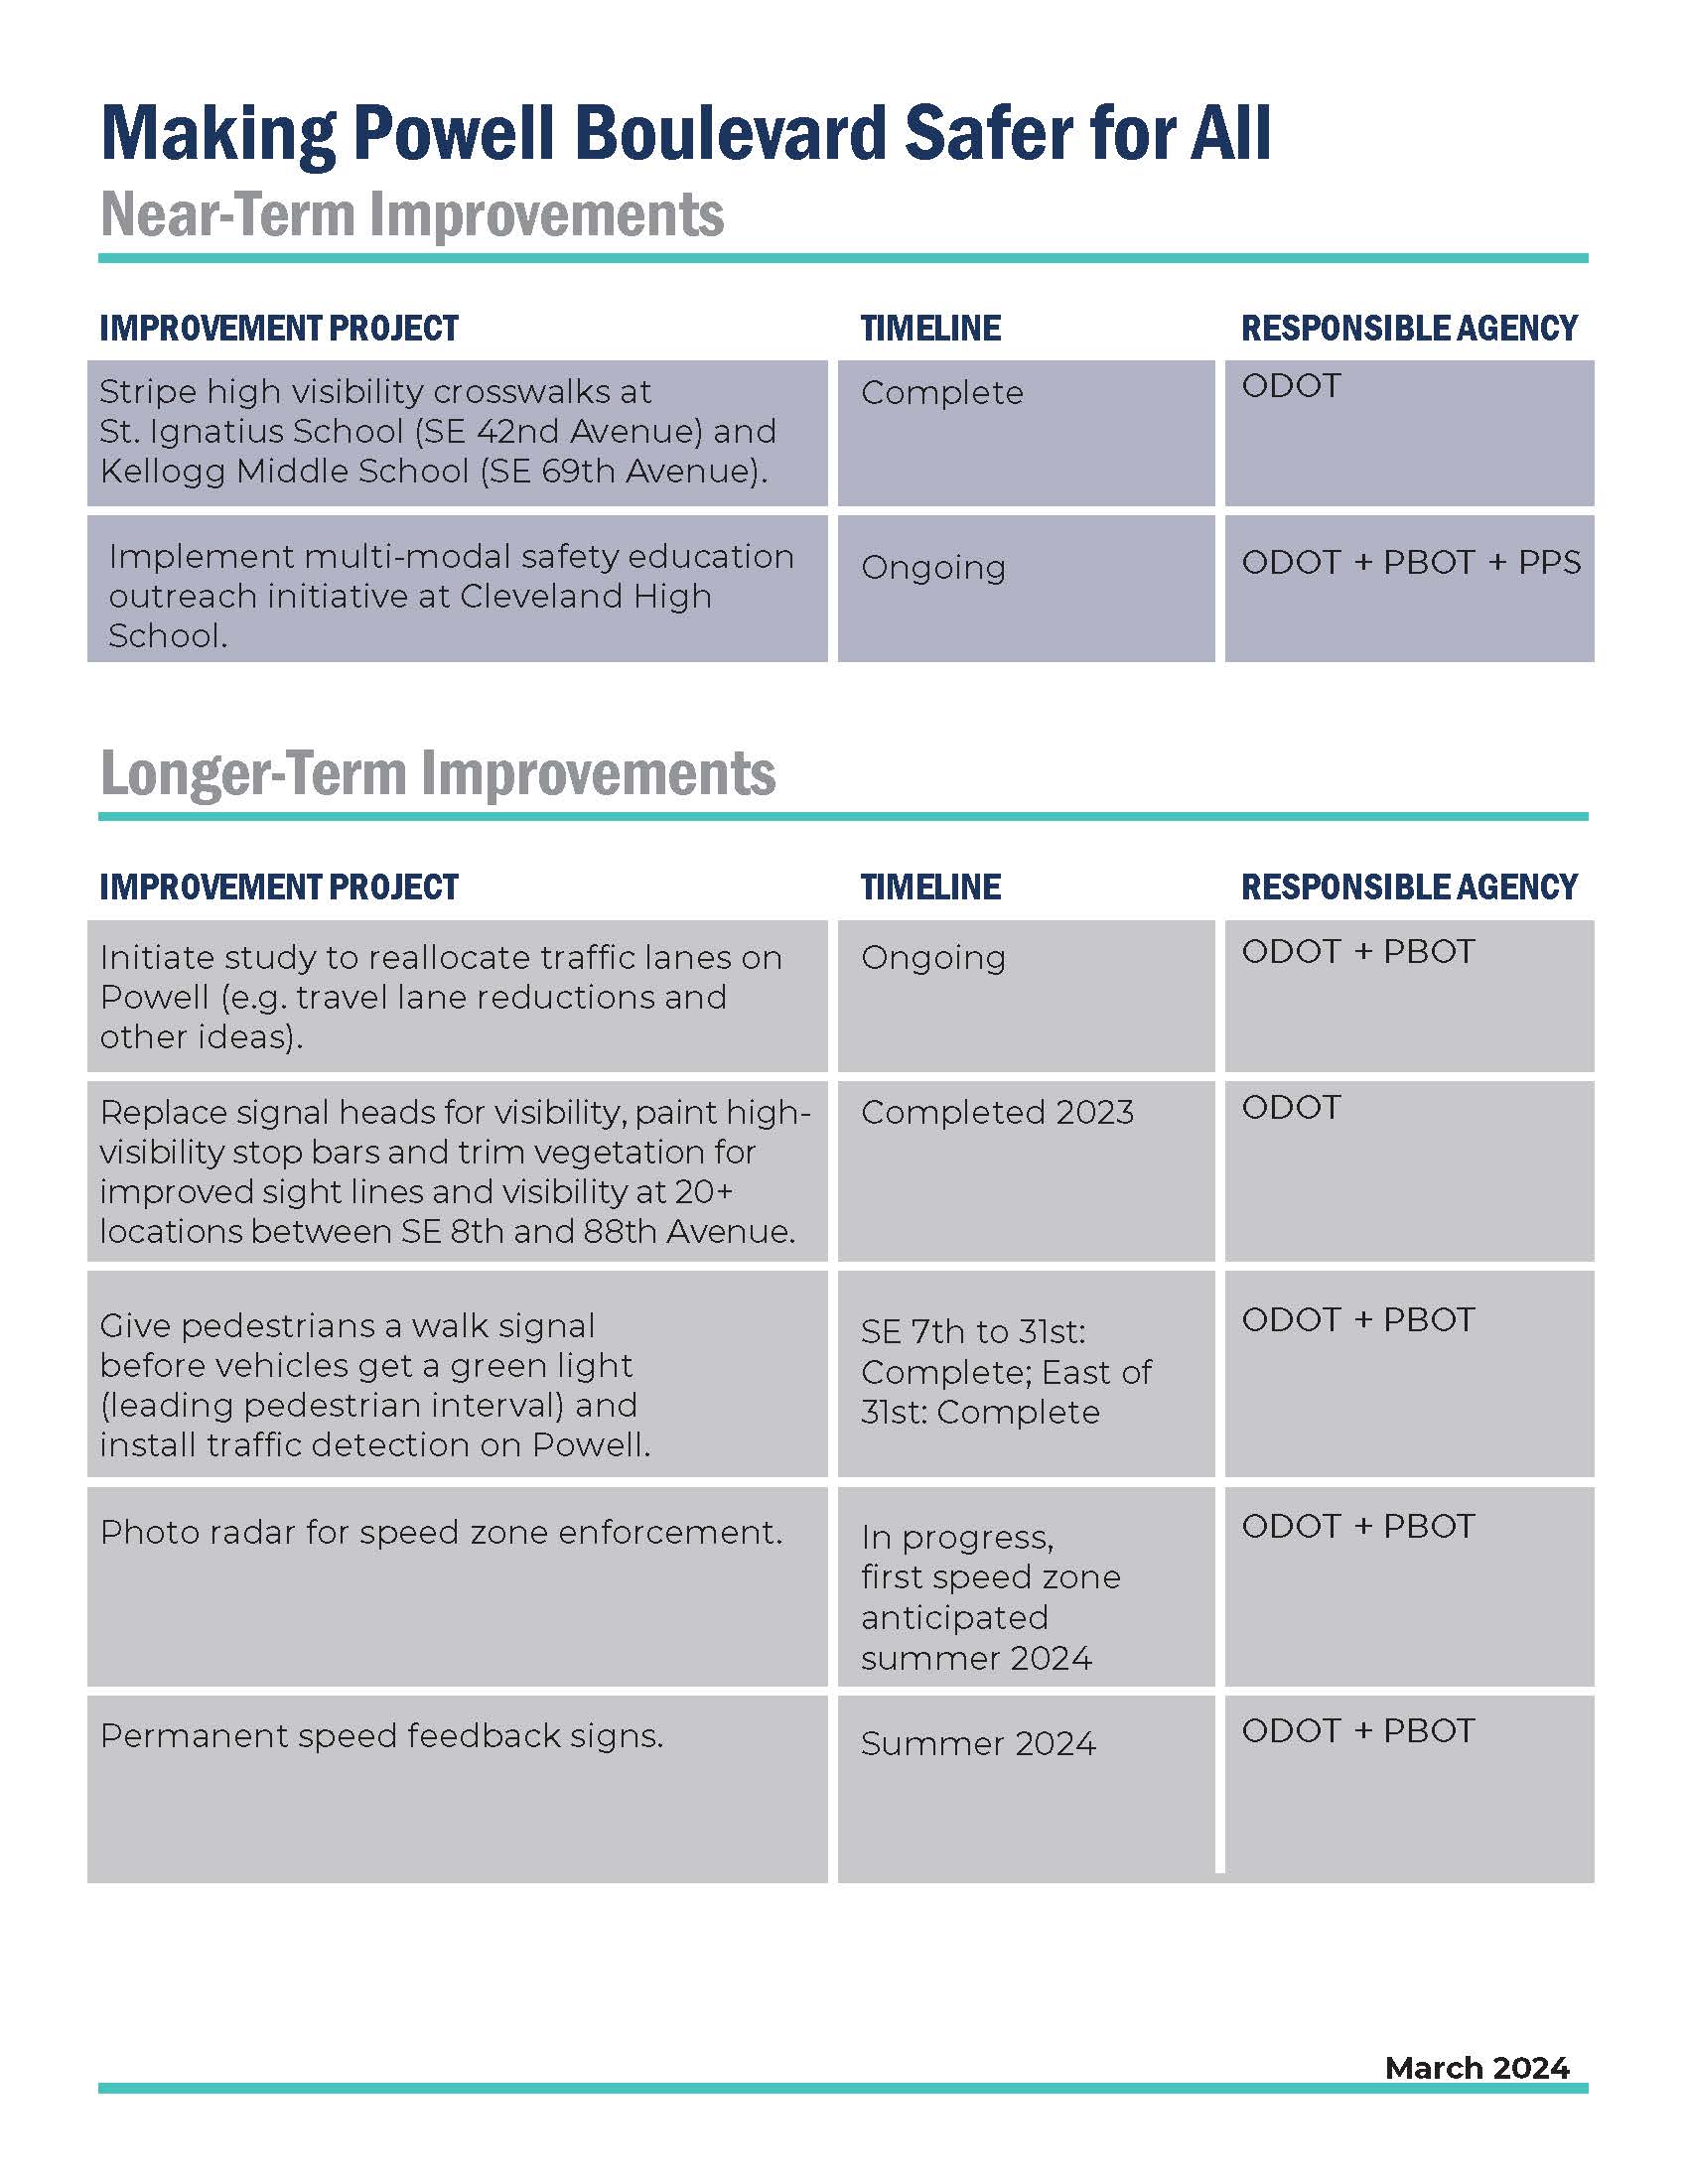 Image of a table showing Inner Powell safety improvements and timelines.